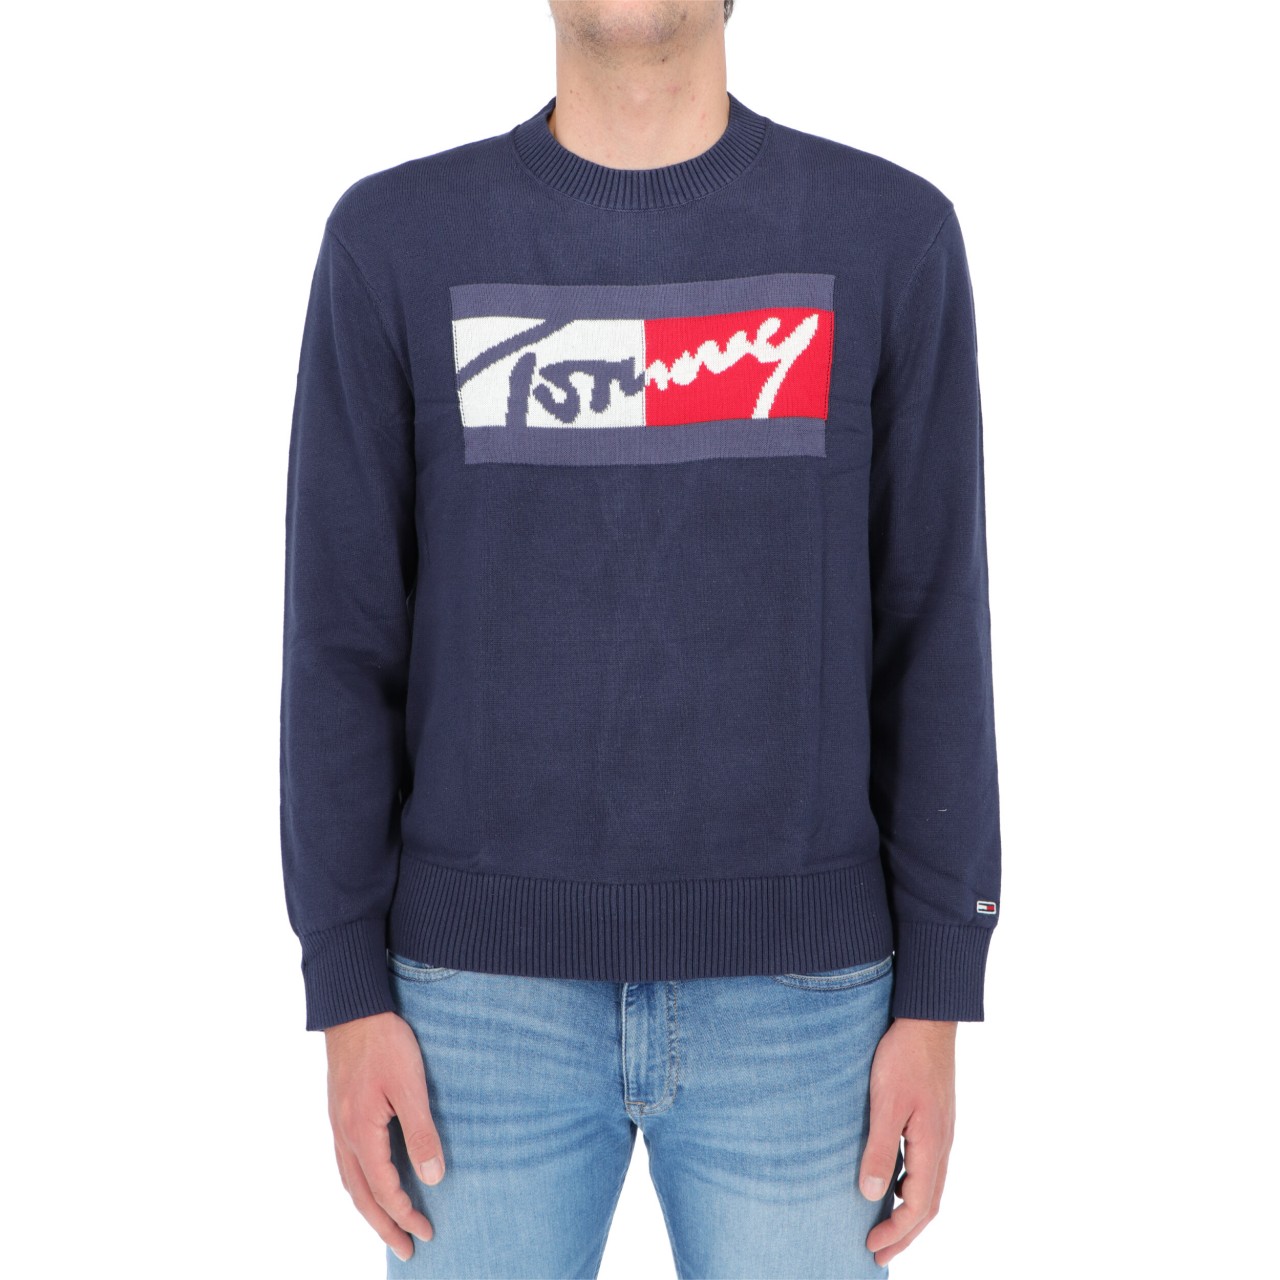 Tommy hilfiger Uomo Maglia Tommy Hilfiger Jeans Uomo Branded Sweater 11365Q